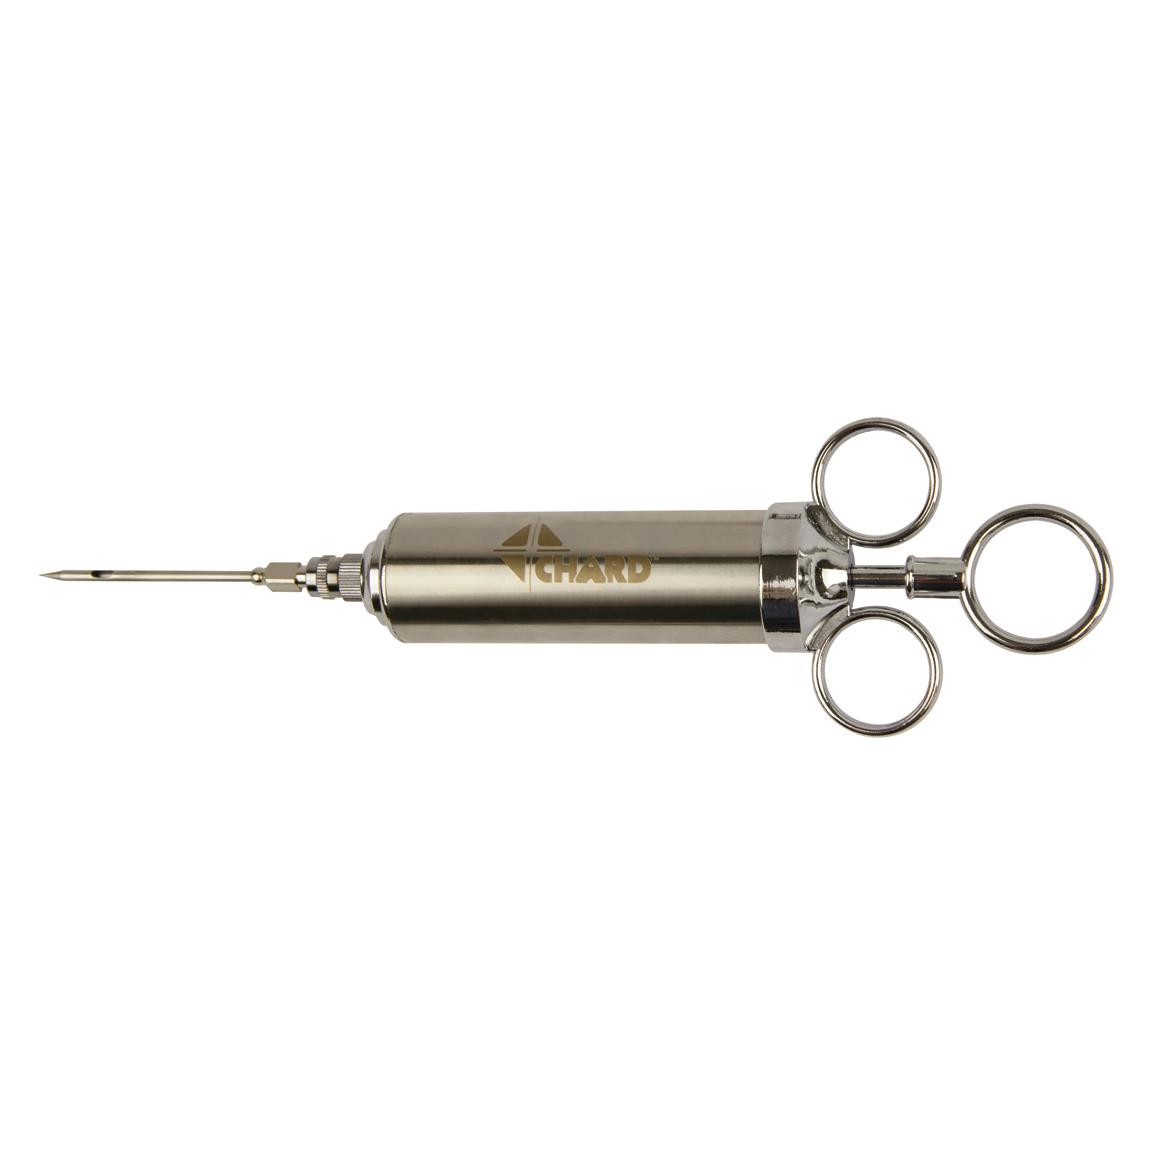 Chard Stainless Steel Injector, 2 oz.